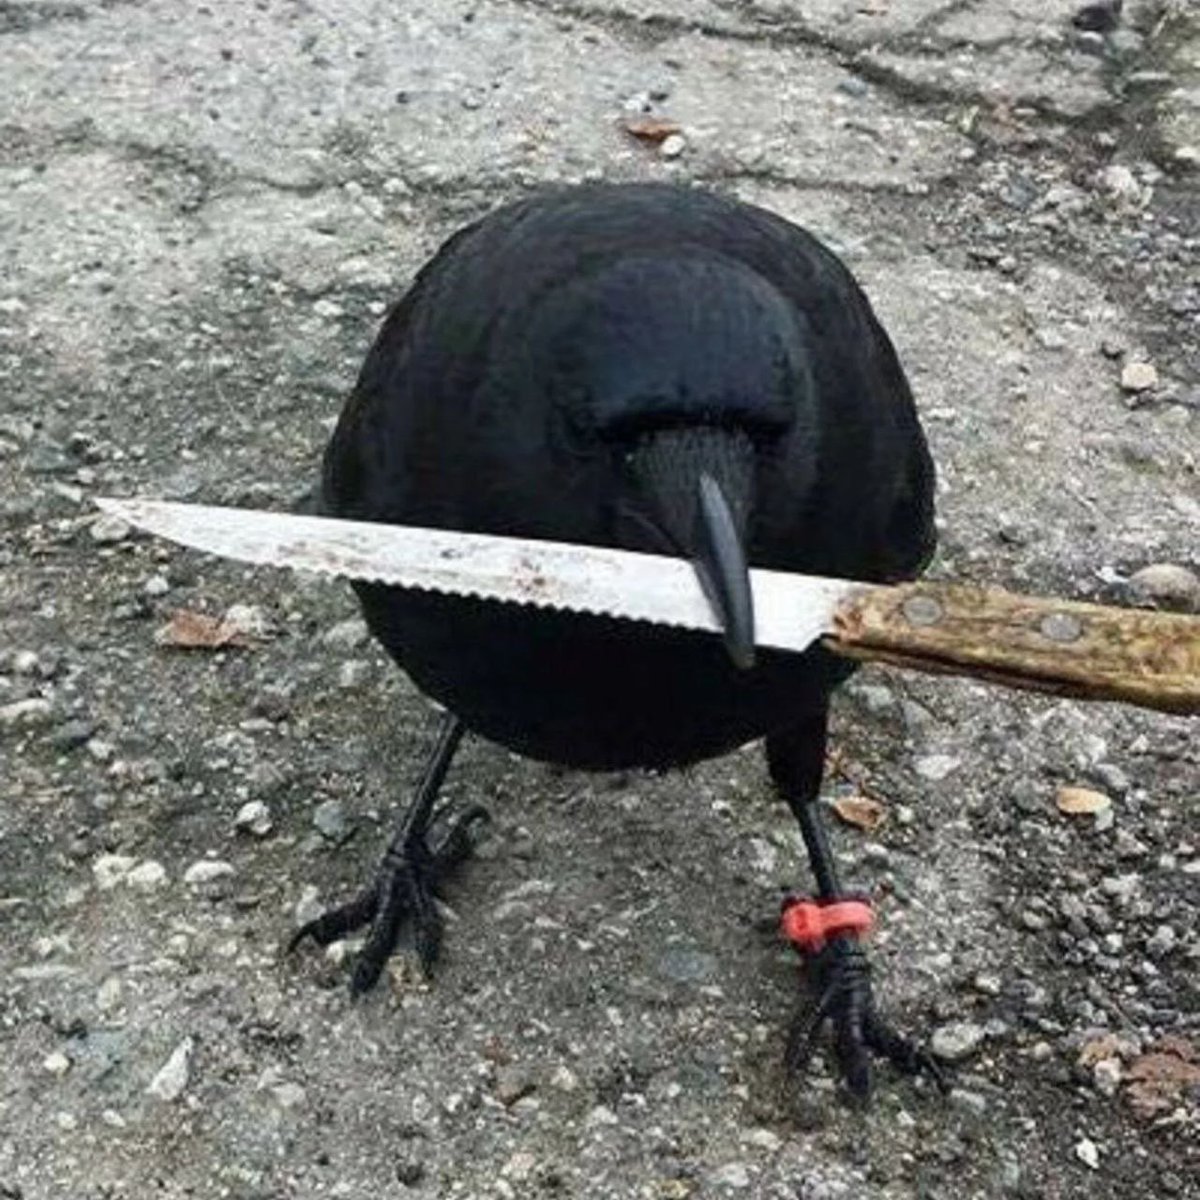 GM

crow with knife